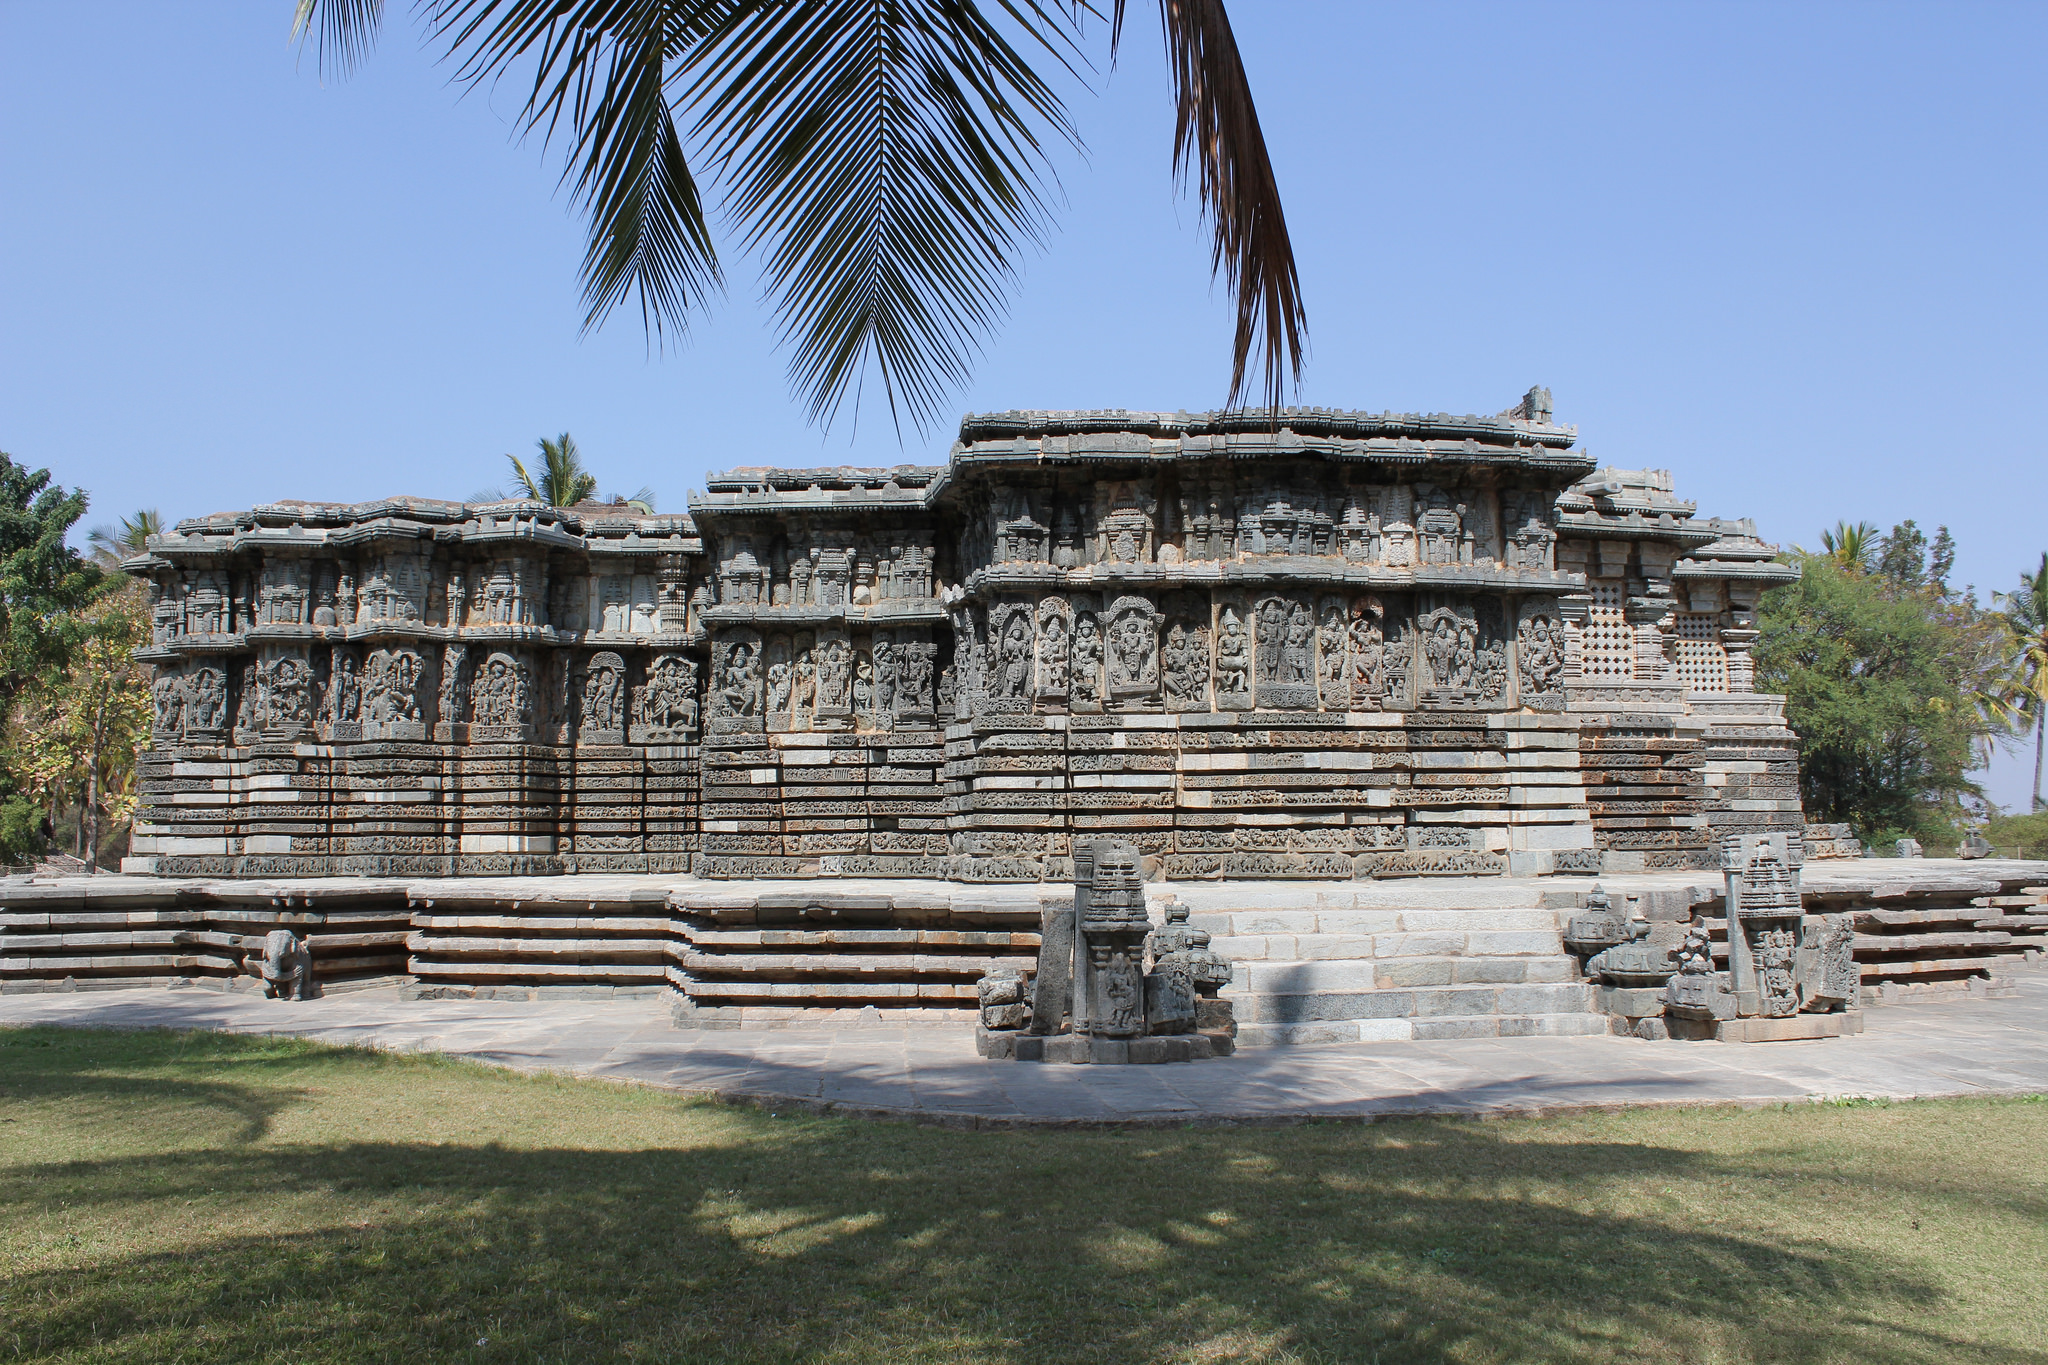 What is the difference between Hoisaleshwar temple, Halebid temple,  Narasimha temple, Chennakeshava temple and Belur temple? Or are those the  same? - Quora